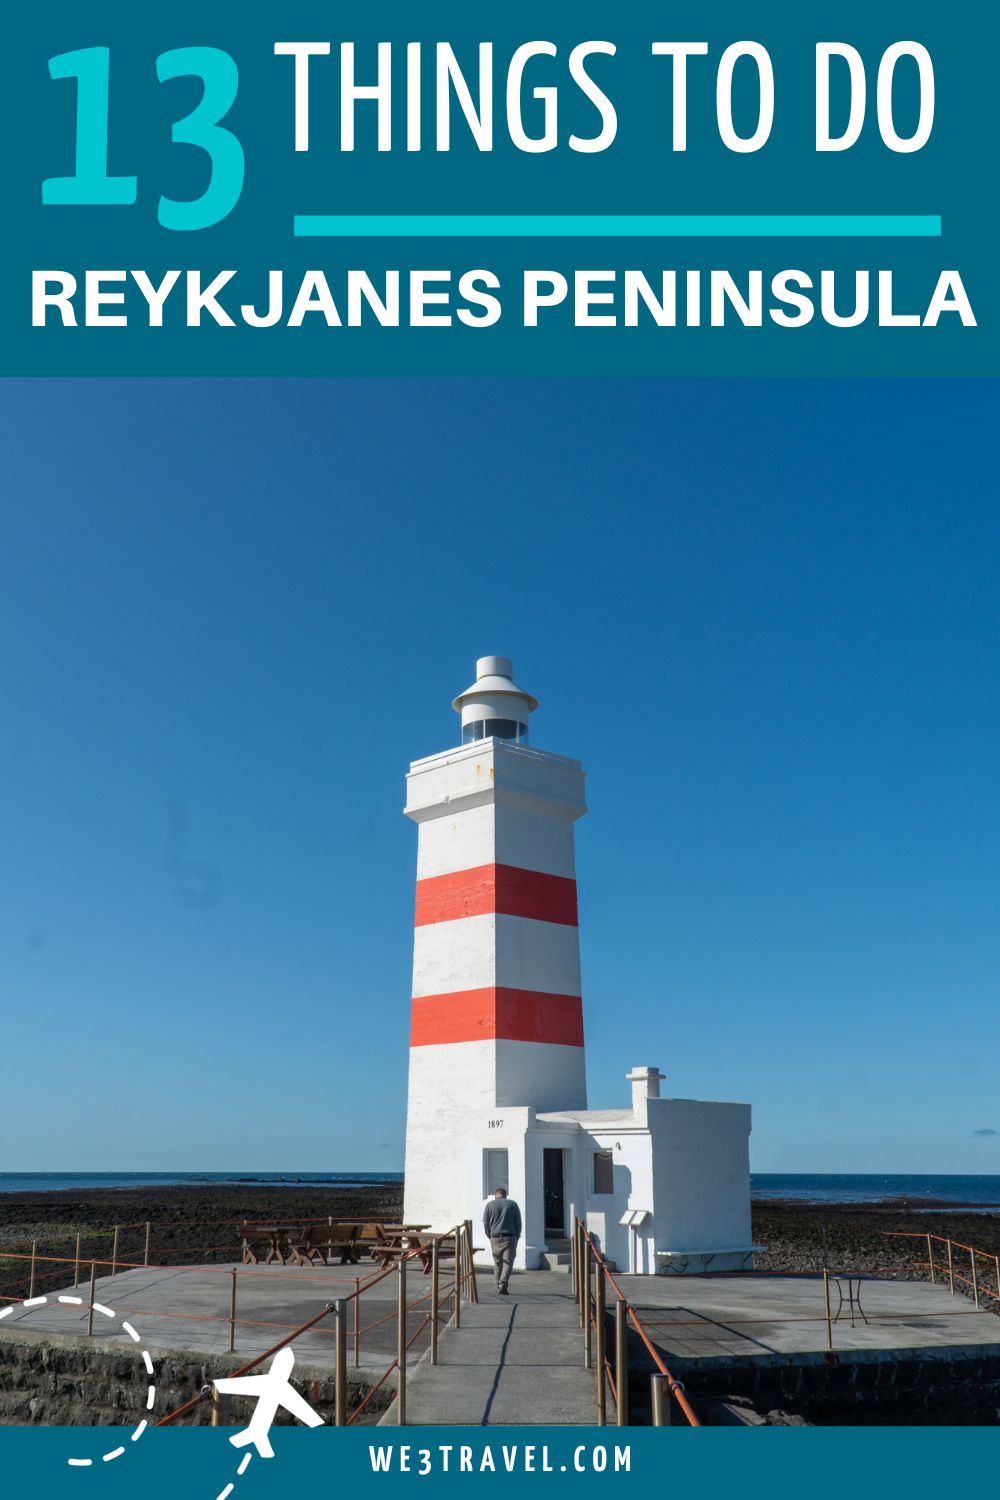 13 Things to do on the Reykjanes Peninsula in iceland